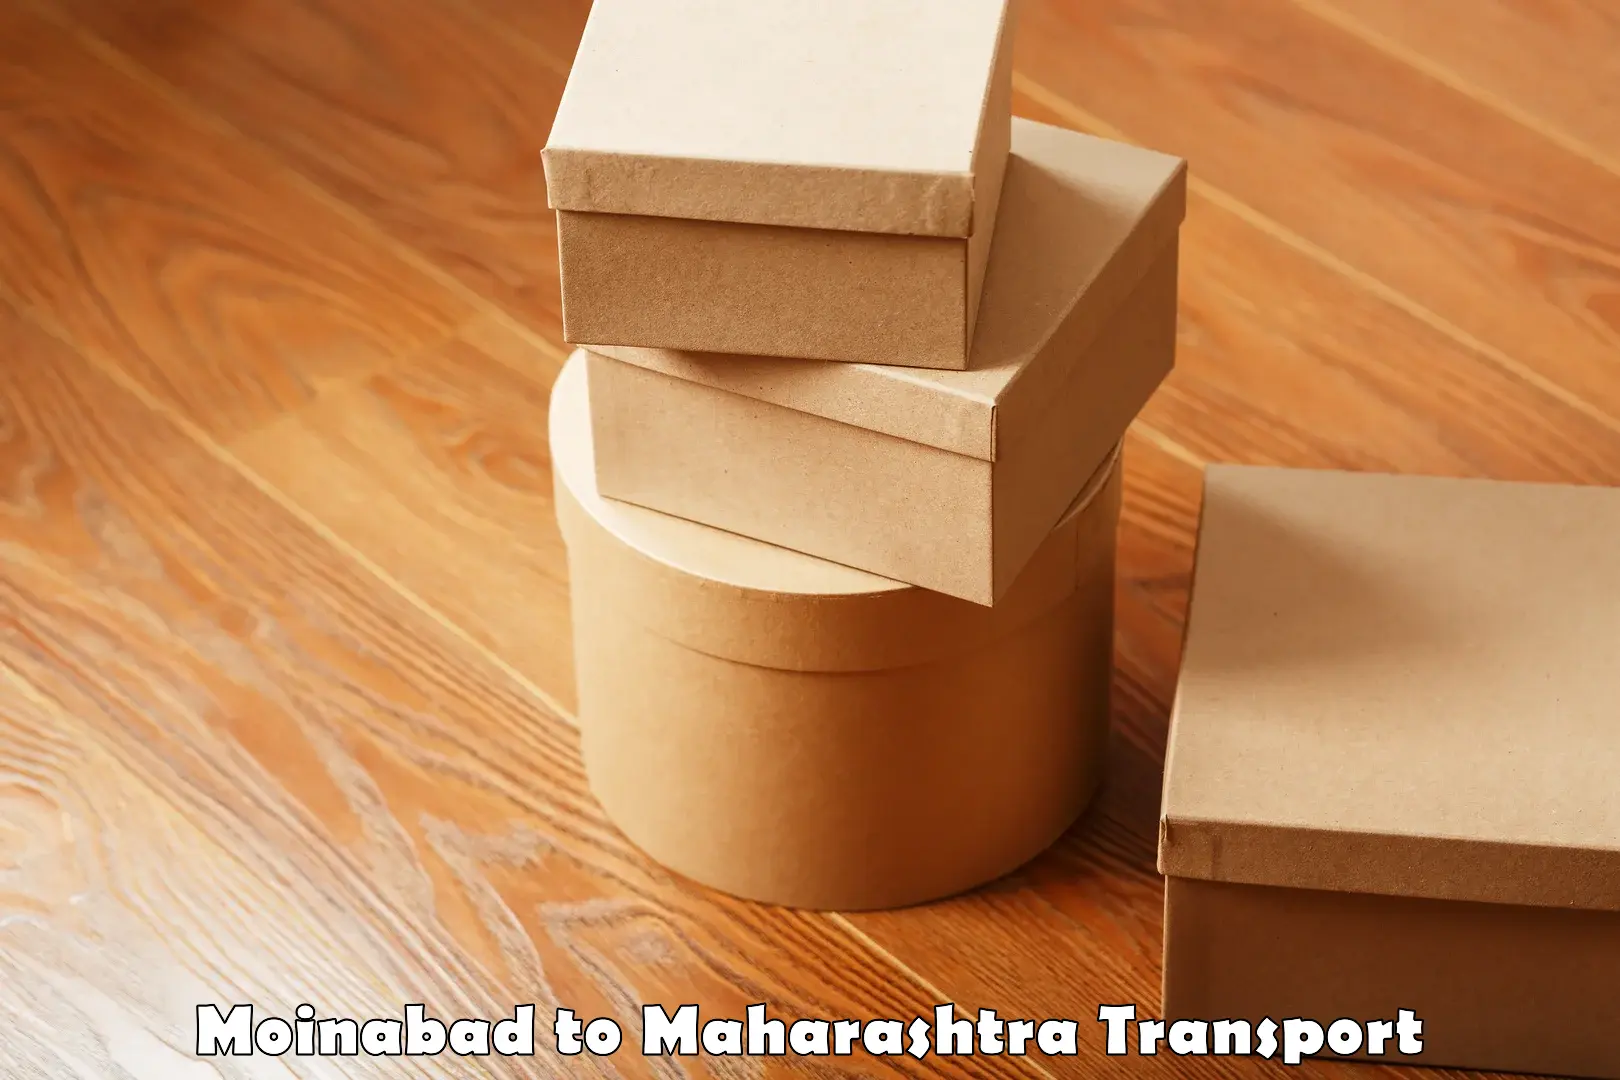 Air freight transport services in Moinabad to Talegaon Dabhade